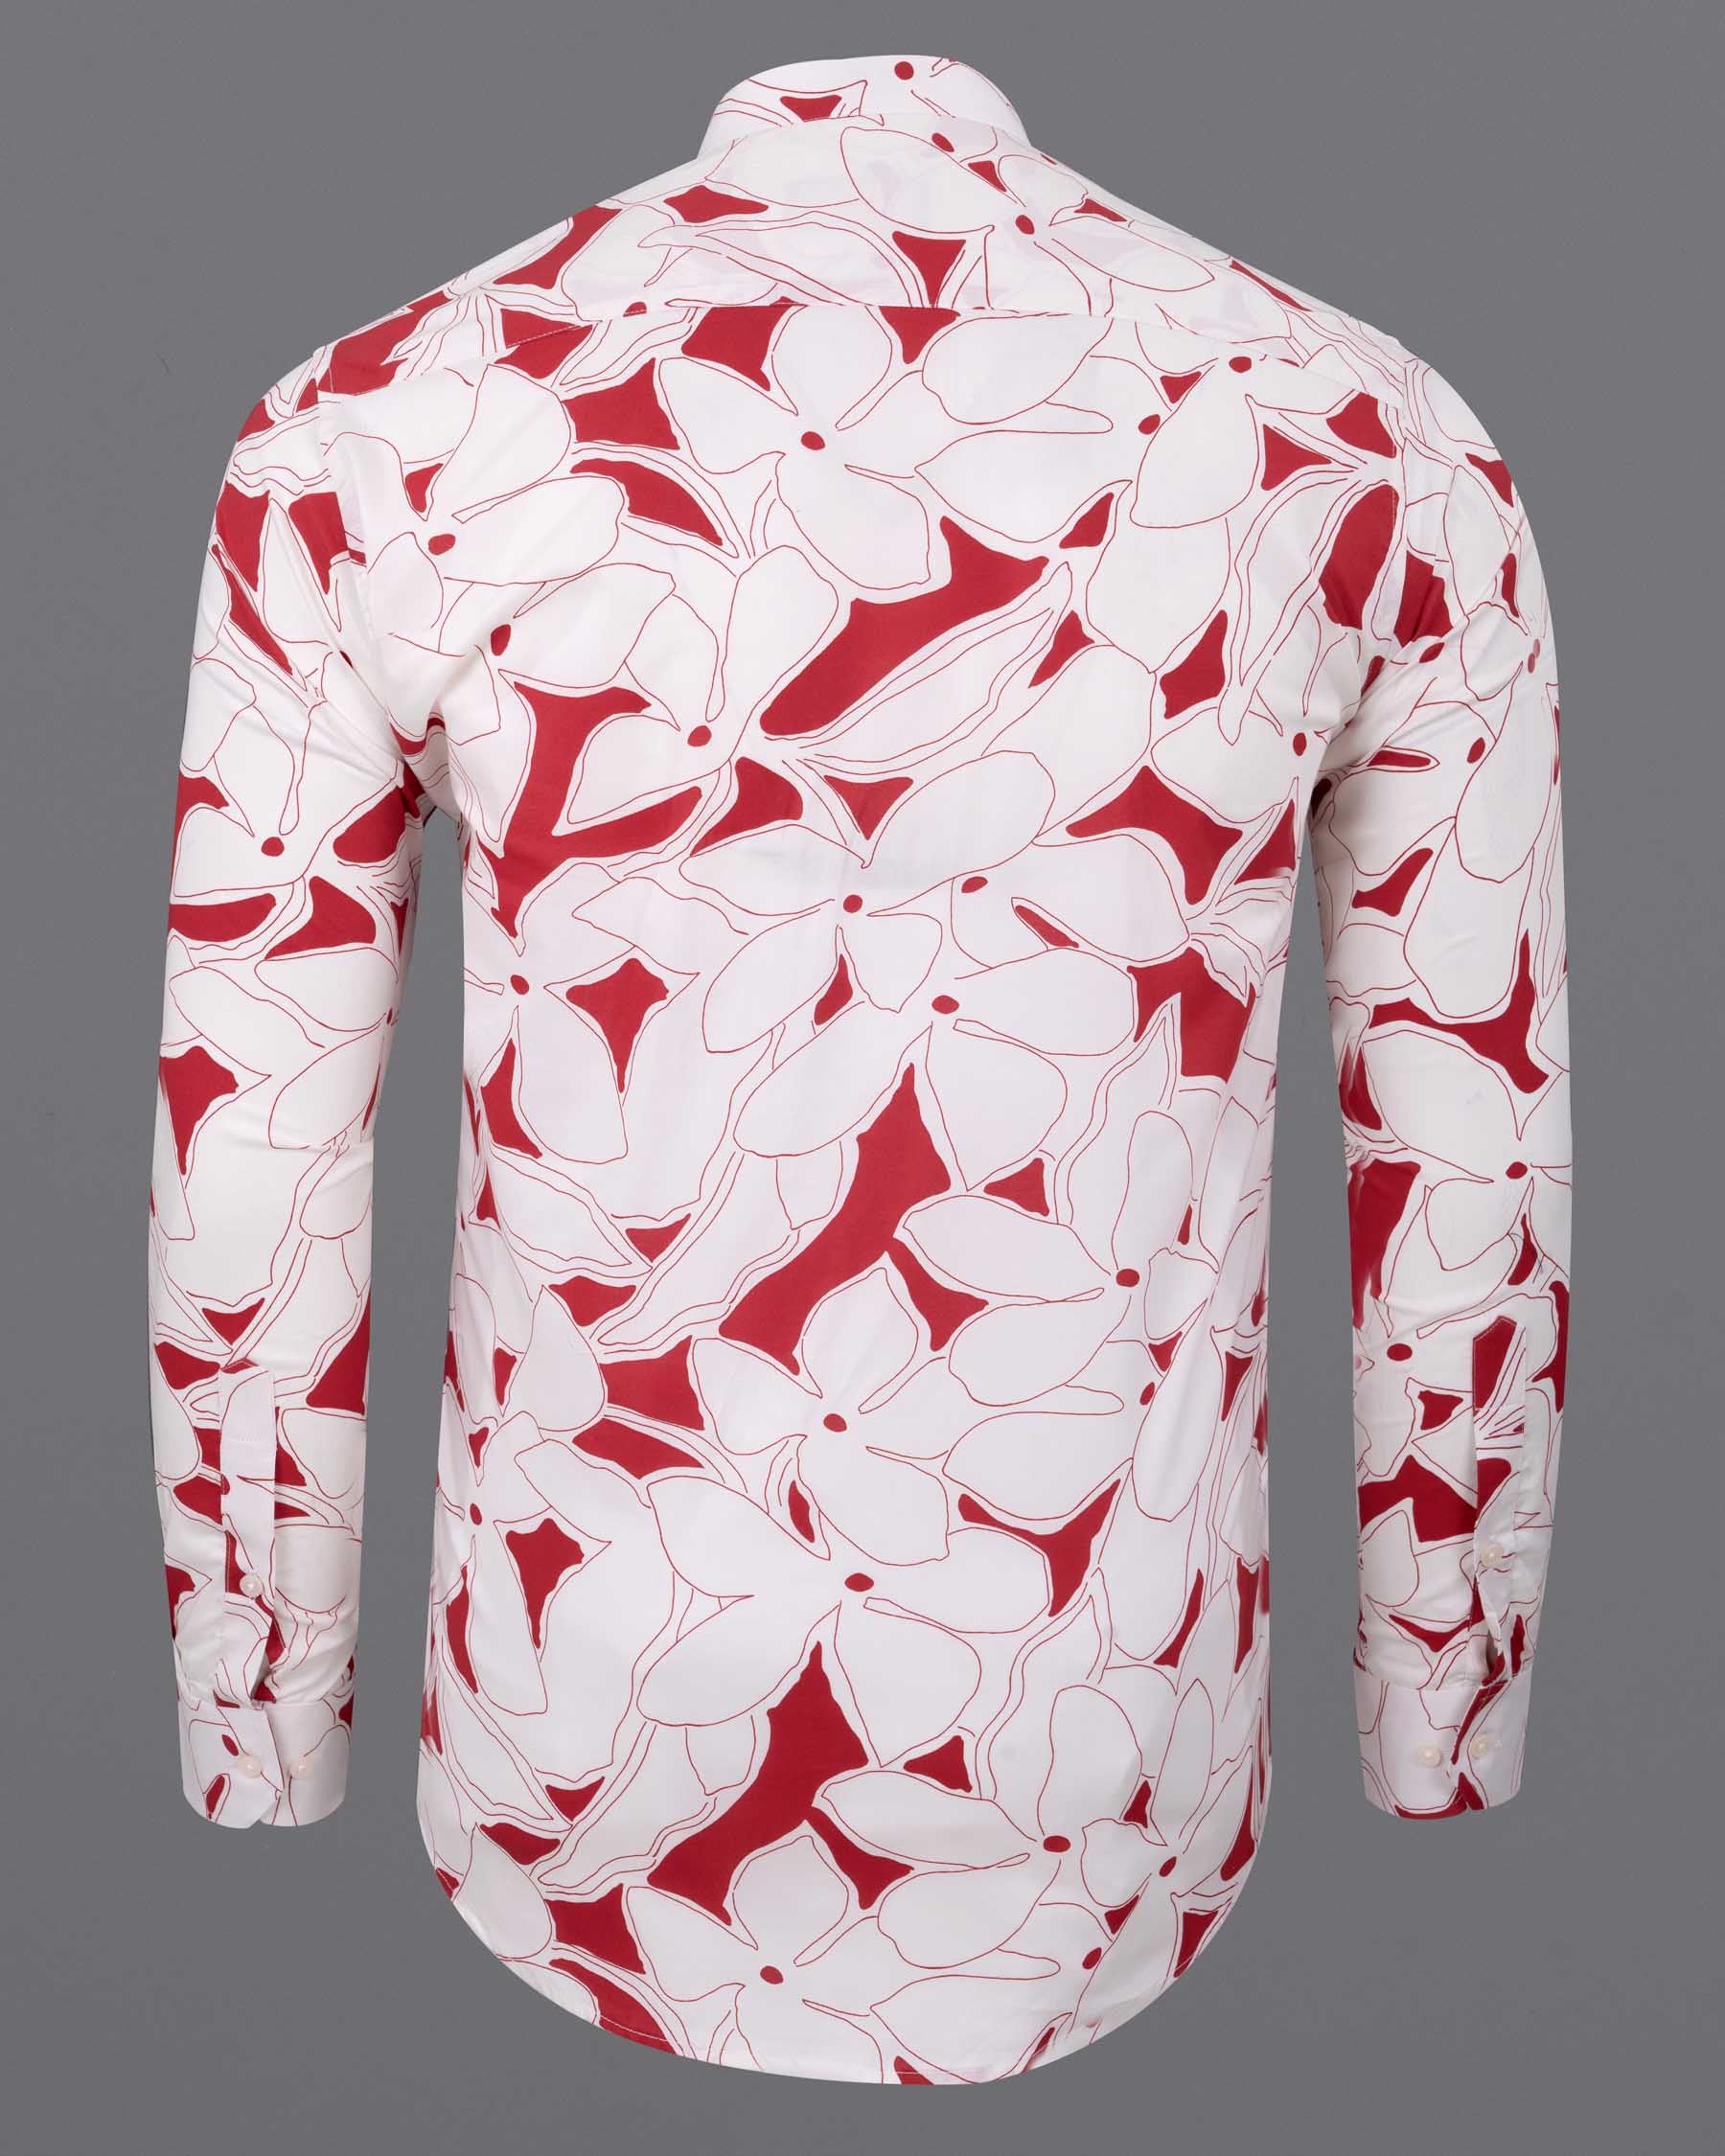 off White with red Quirky flowers Printed Premium Cotton Shirt 6060-M-38, 6060-M-H-38, 6060-M-39, 6060-M-H-39, 6060-M-40, 6060-M-H-40, 6060-M-42, 6060-M-H-42, 6060-M-44, 6060-M-H-44, 6060-M-46, 6060-M-H-46, 6060-M-48, 6060-M-H-48, 6060-M-50, 6060-M-H-50, 6060-M-52, 6060-M-H-52